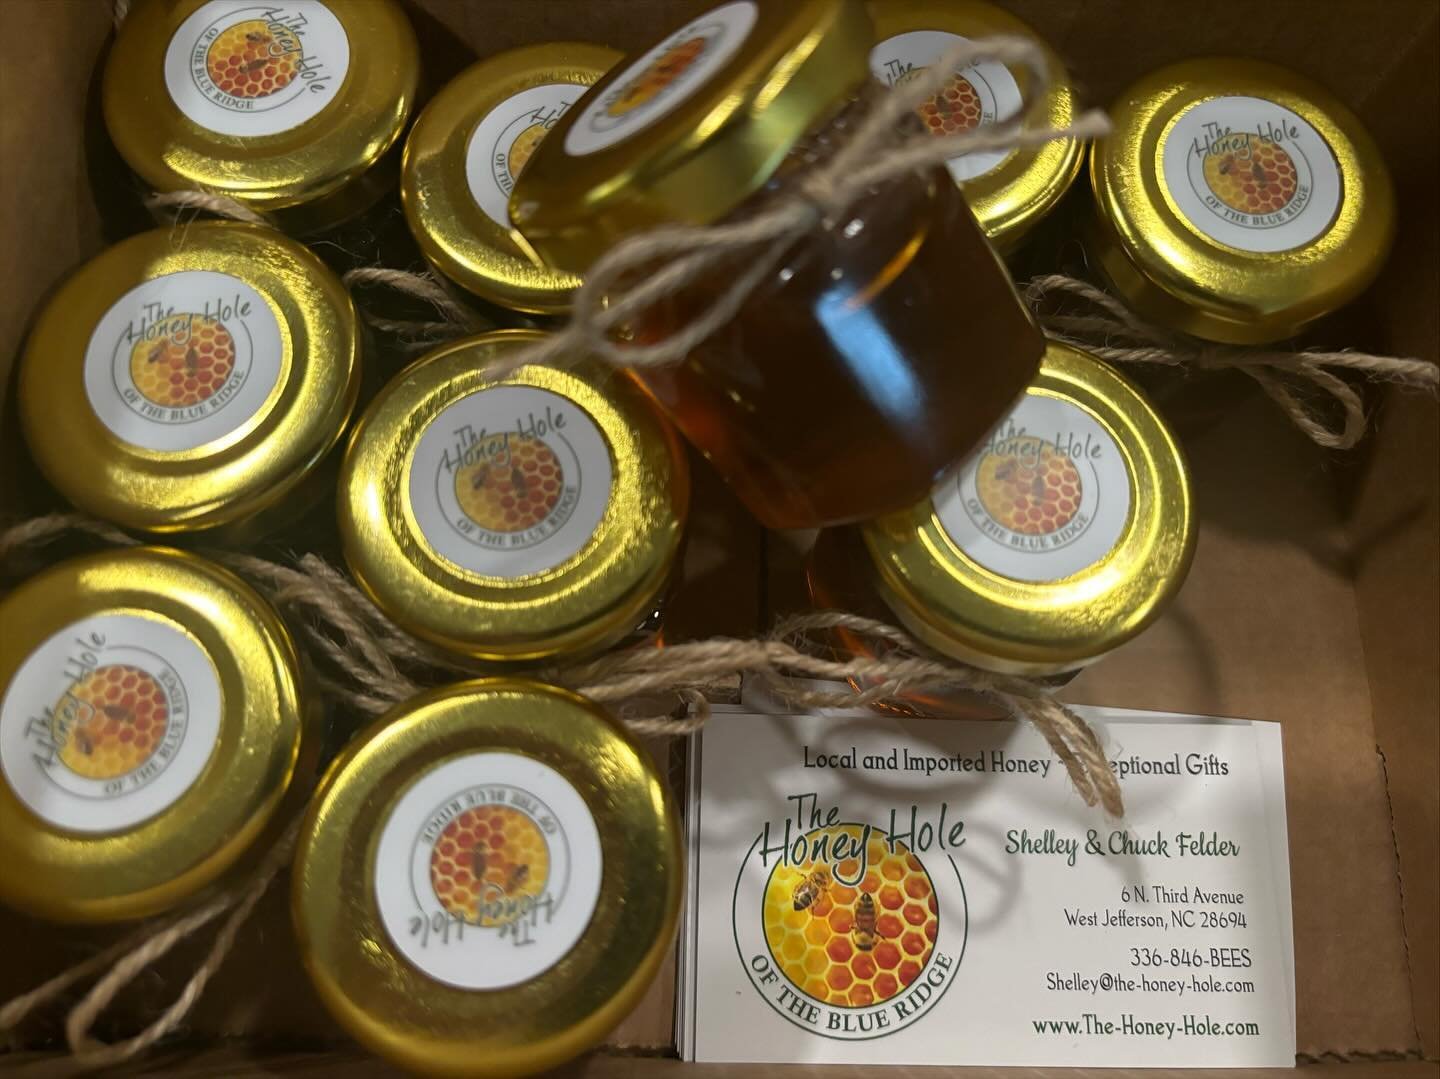 Another bee 🐝- utiful partnership has blossomed 🌸 

The Honey Hole 🍯 in downtown West Jefferson offers delicious local honey and honey varieties, gorgeous fine gifts and more. Our #geodome guests will be surprised with a sample of their yummy offe